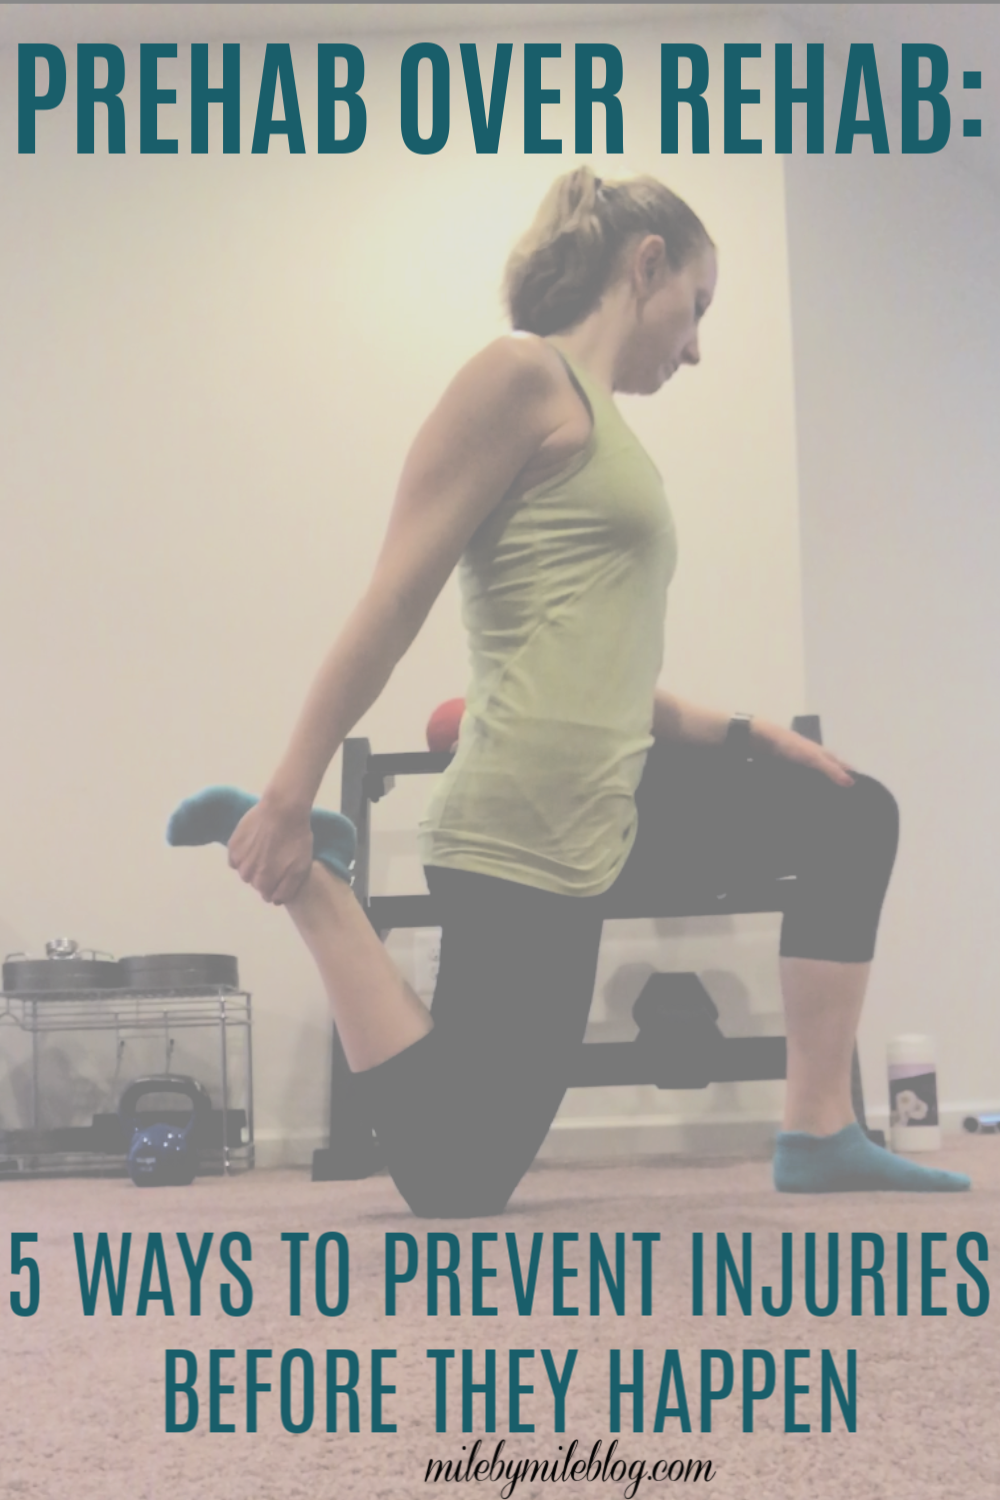 Looking to prevent an injury before it keeps your sidelined from running? Try some prehab! Here are some ways to include prehab in your routine to hopefully prevent running injuries. #prehab #running #injuryprevention #runningtips #corework #mobility #crosstraining 